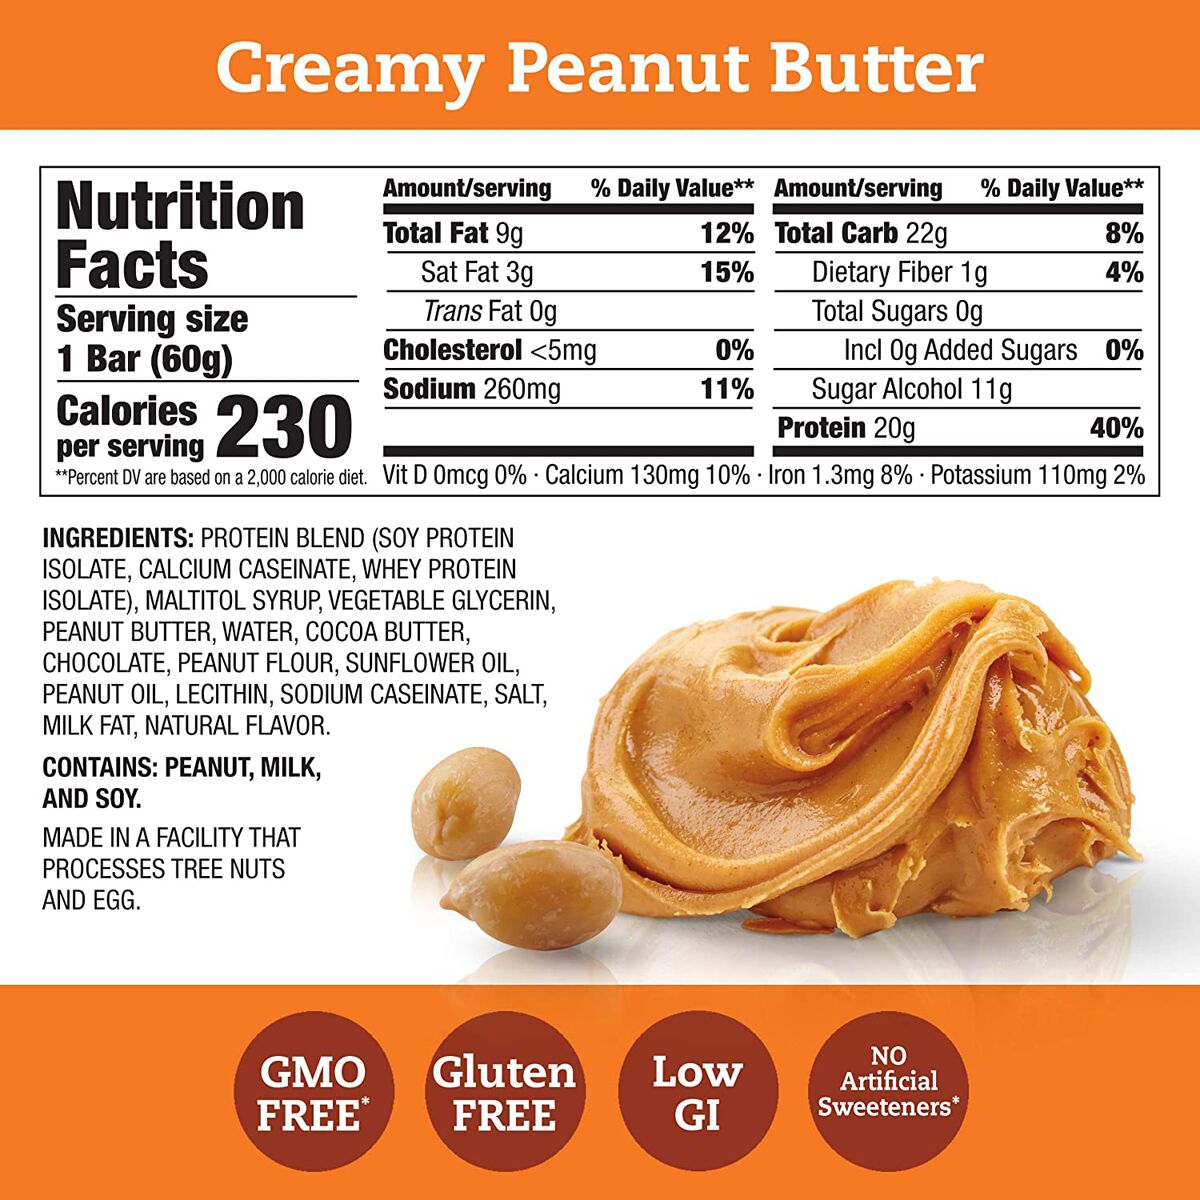 #Flavor_Creamy Peanut Butter, Chocolate Dipped #Size_10 bars